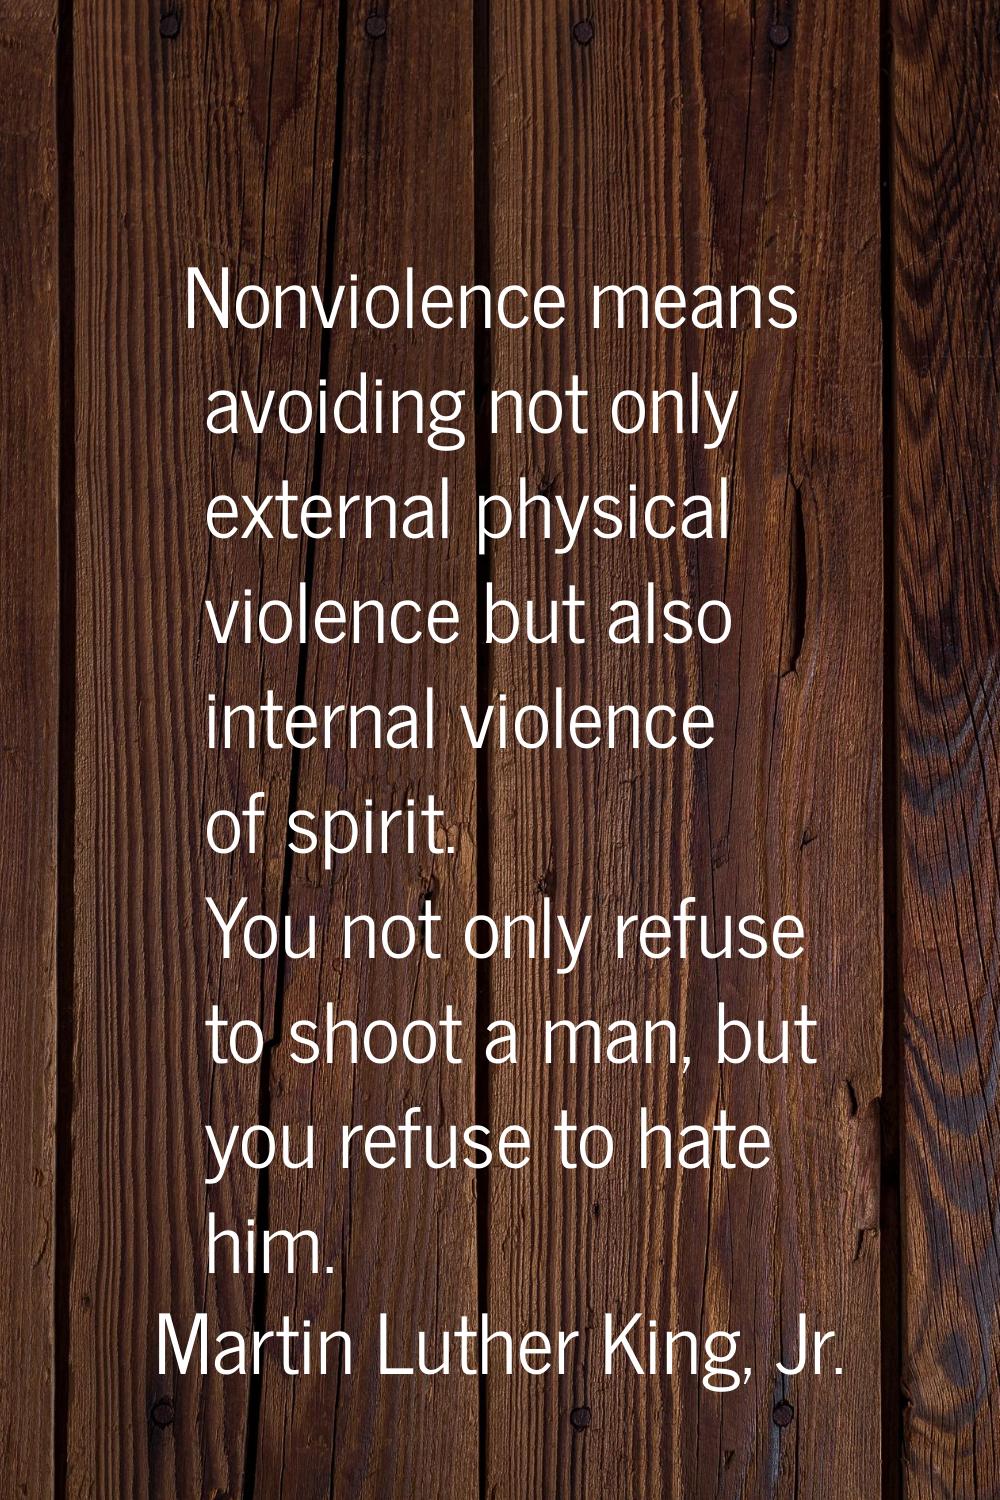 Nonviolence means avoiding not only external physical violence but also internal violence of spirit